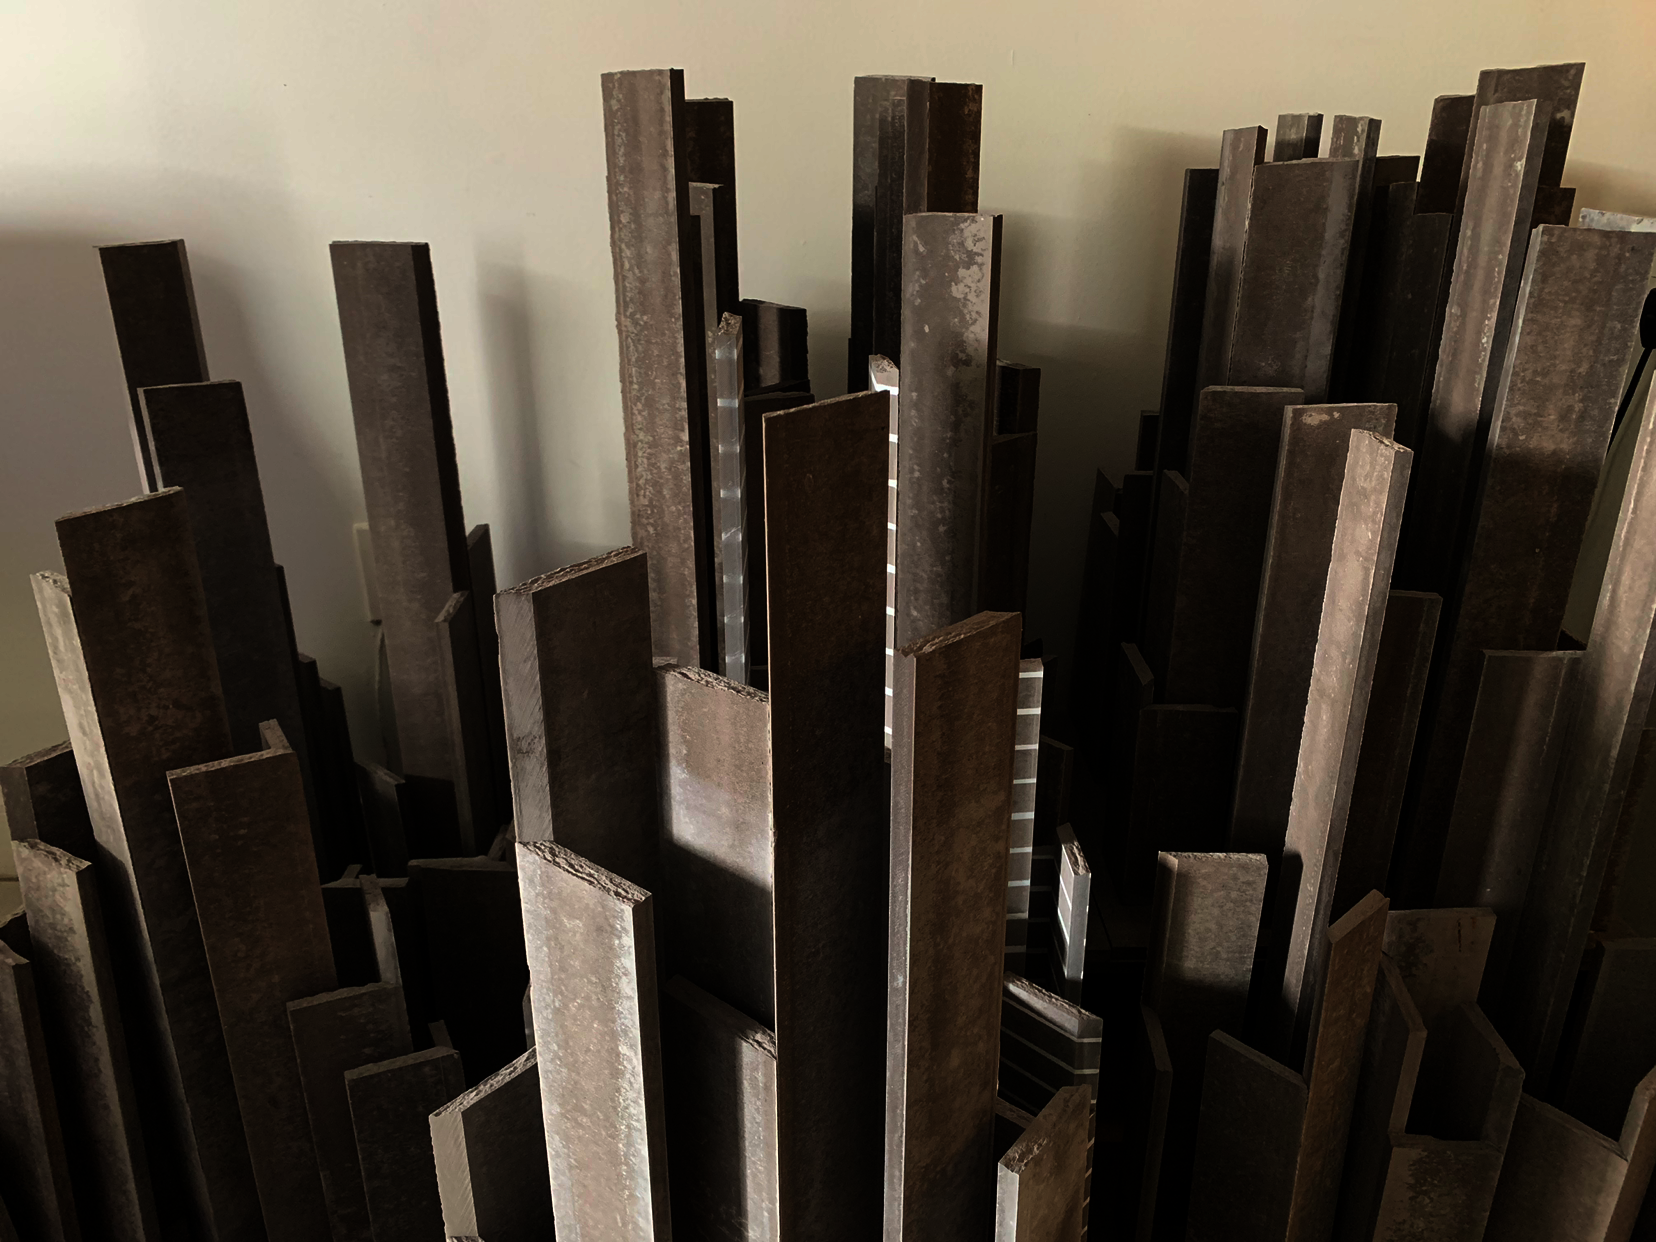 Imponderable Cities by MIKIHUMO #slate #scultures